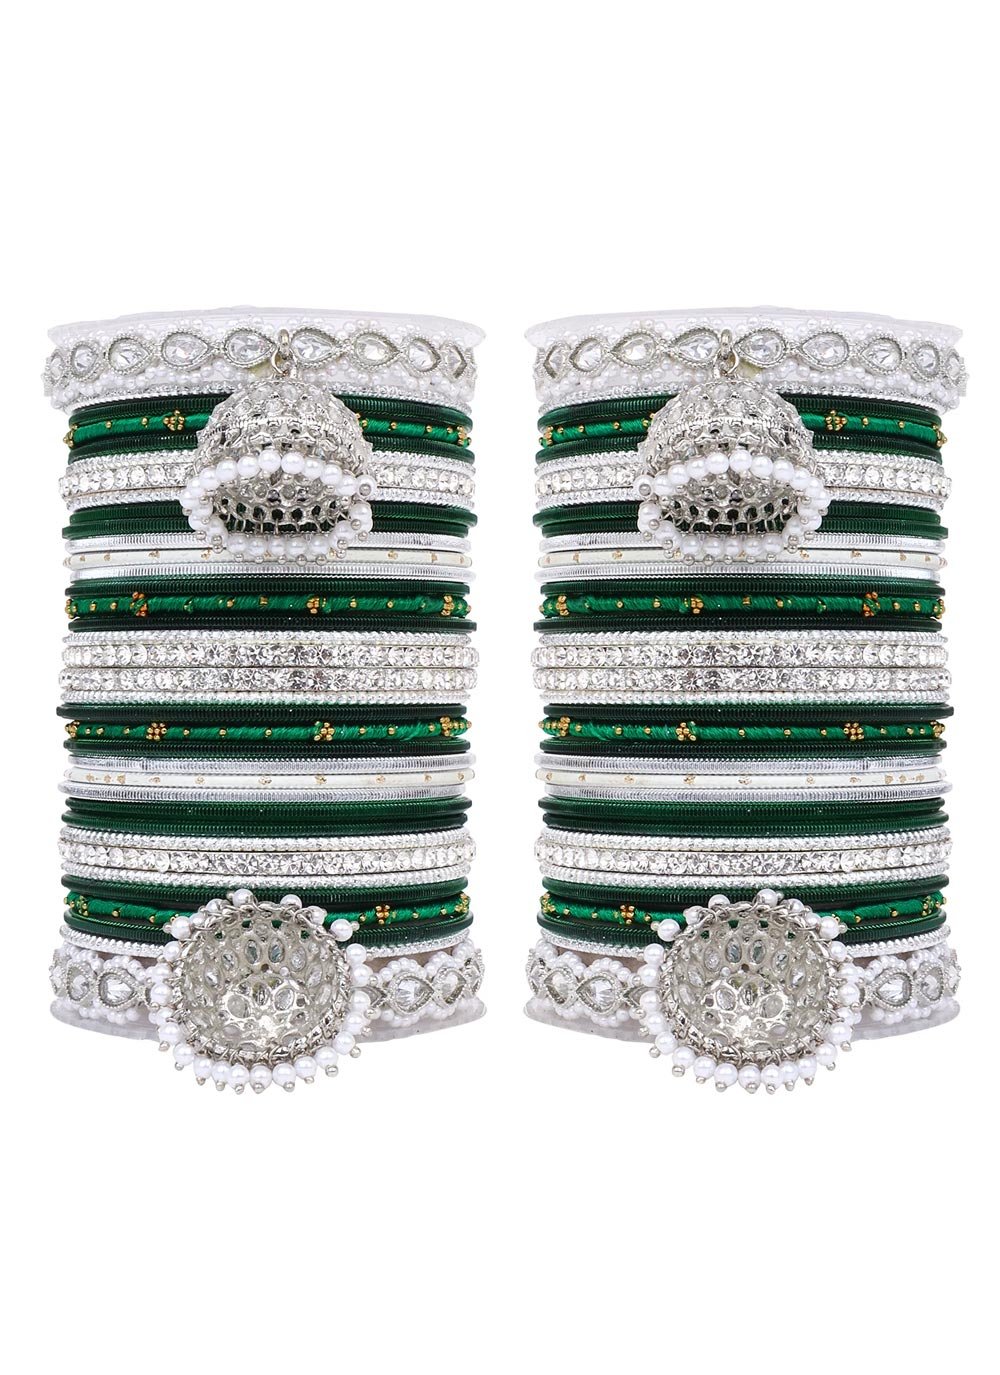 Swanky Silver Rodium Polish Beads Work Green and White Bangles for Bridal